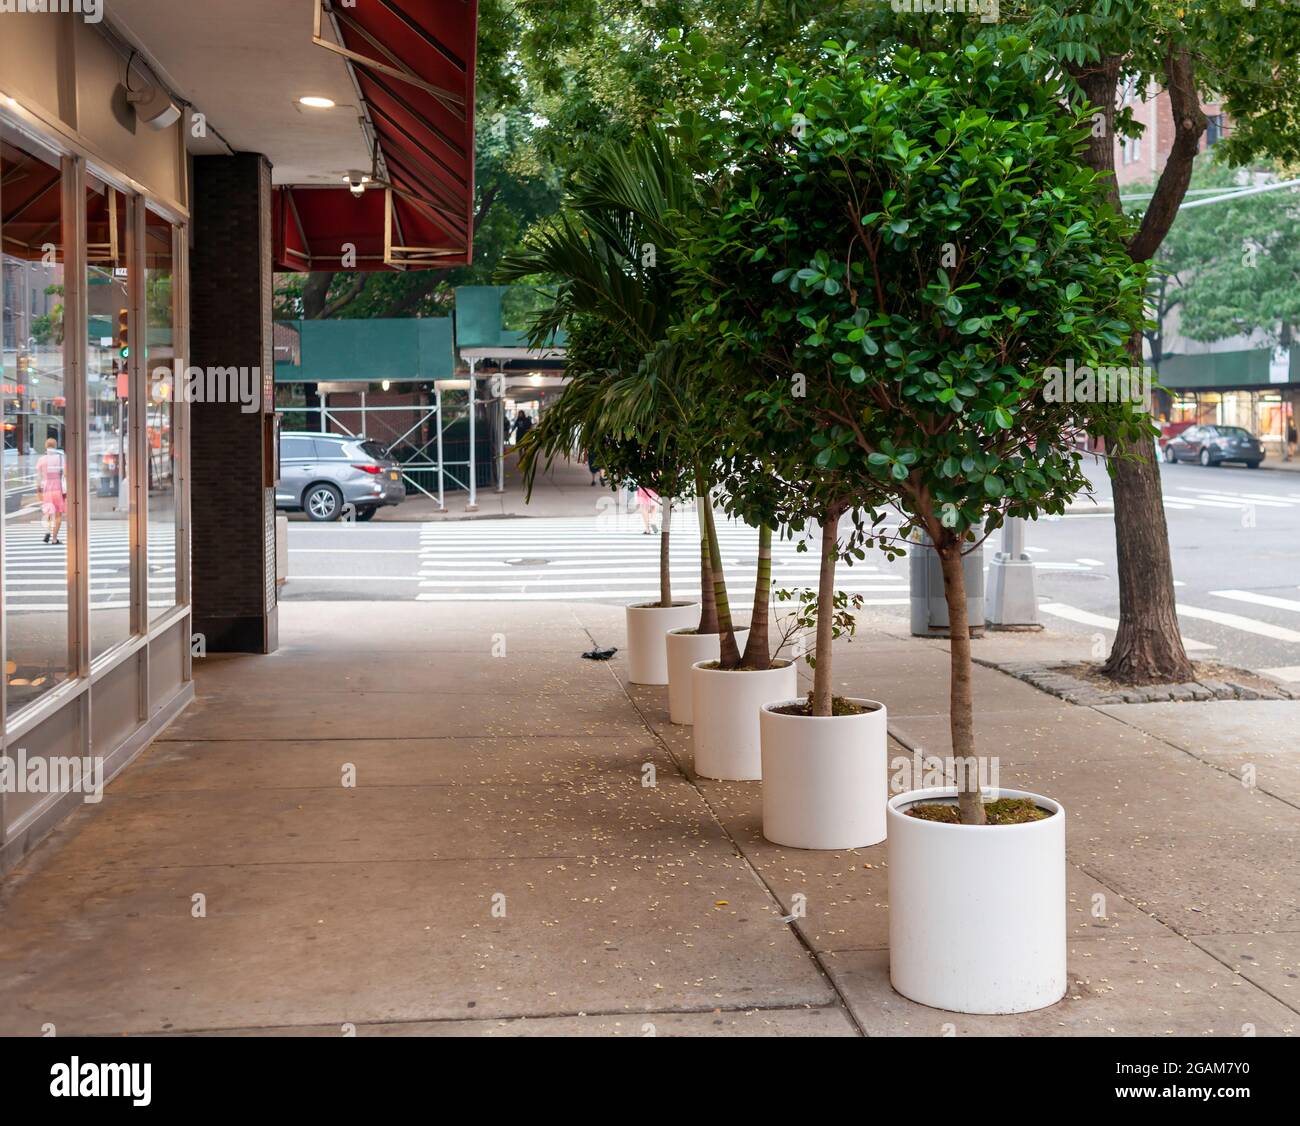 A restaurant in Chelsea leaves its decorative plantings for their al fresco dining in place despite being closed, seen on Tuesday, July 20, 2021. (© Richard B. Levine) Stock Photo